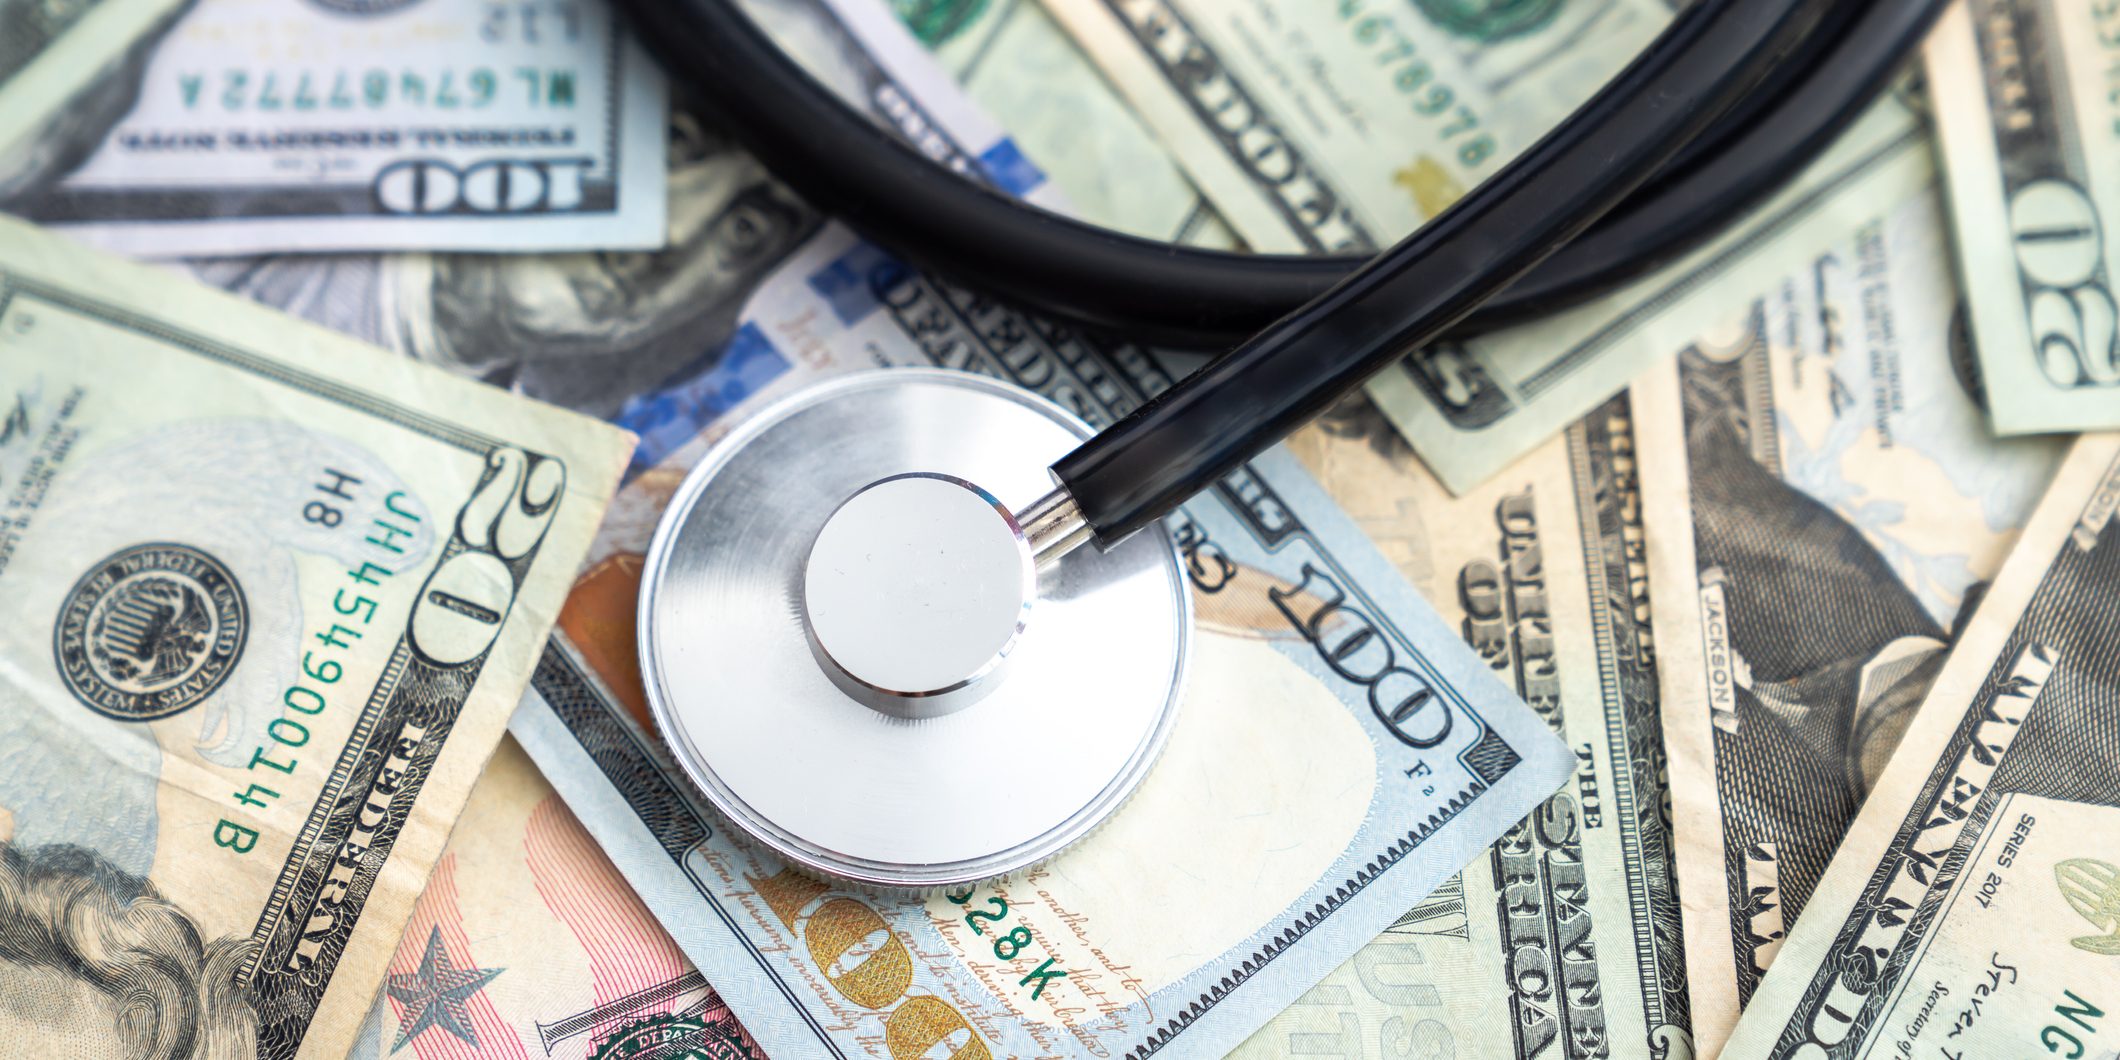 Doctor or nurse stethoscope medical device or equipment with metal parts and black tubing laying on a pile of united states currency in large bills or cash covering the entire surface.